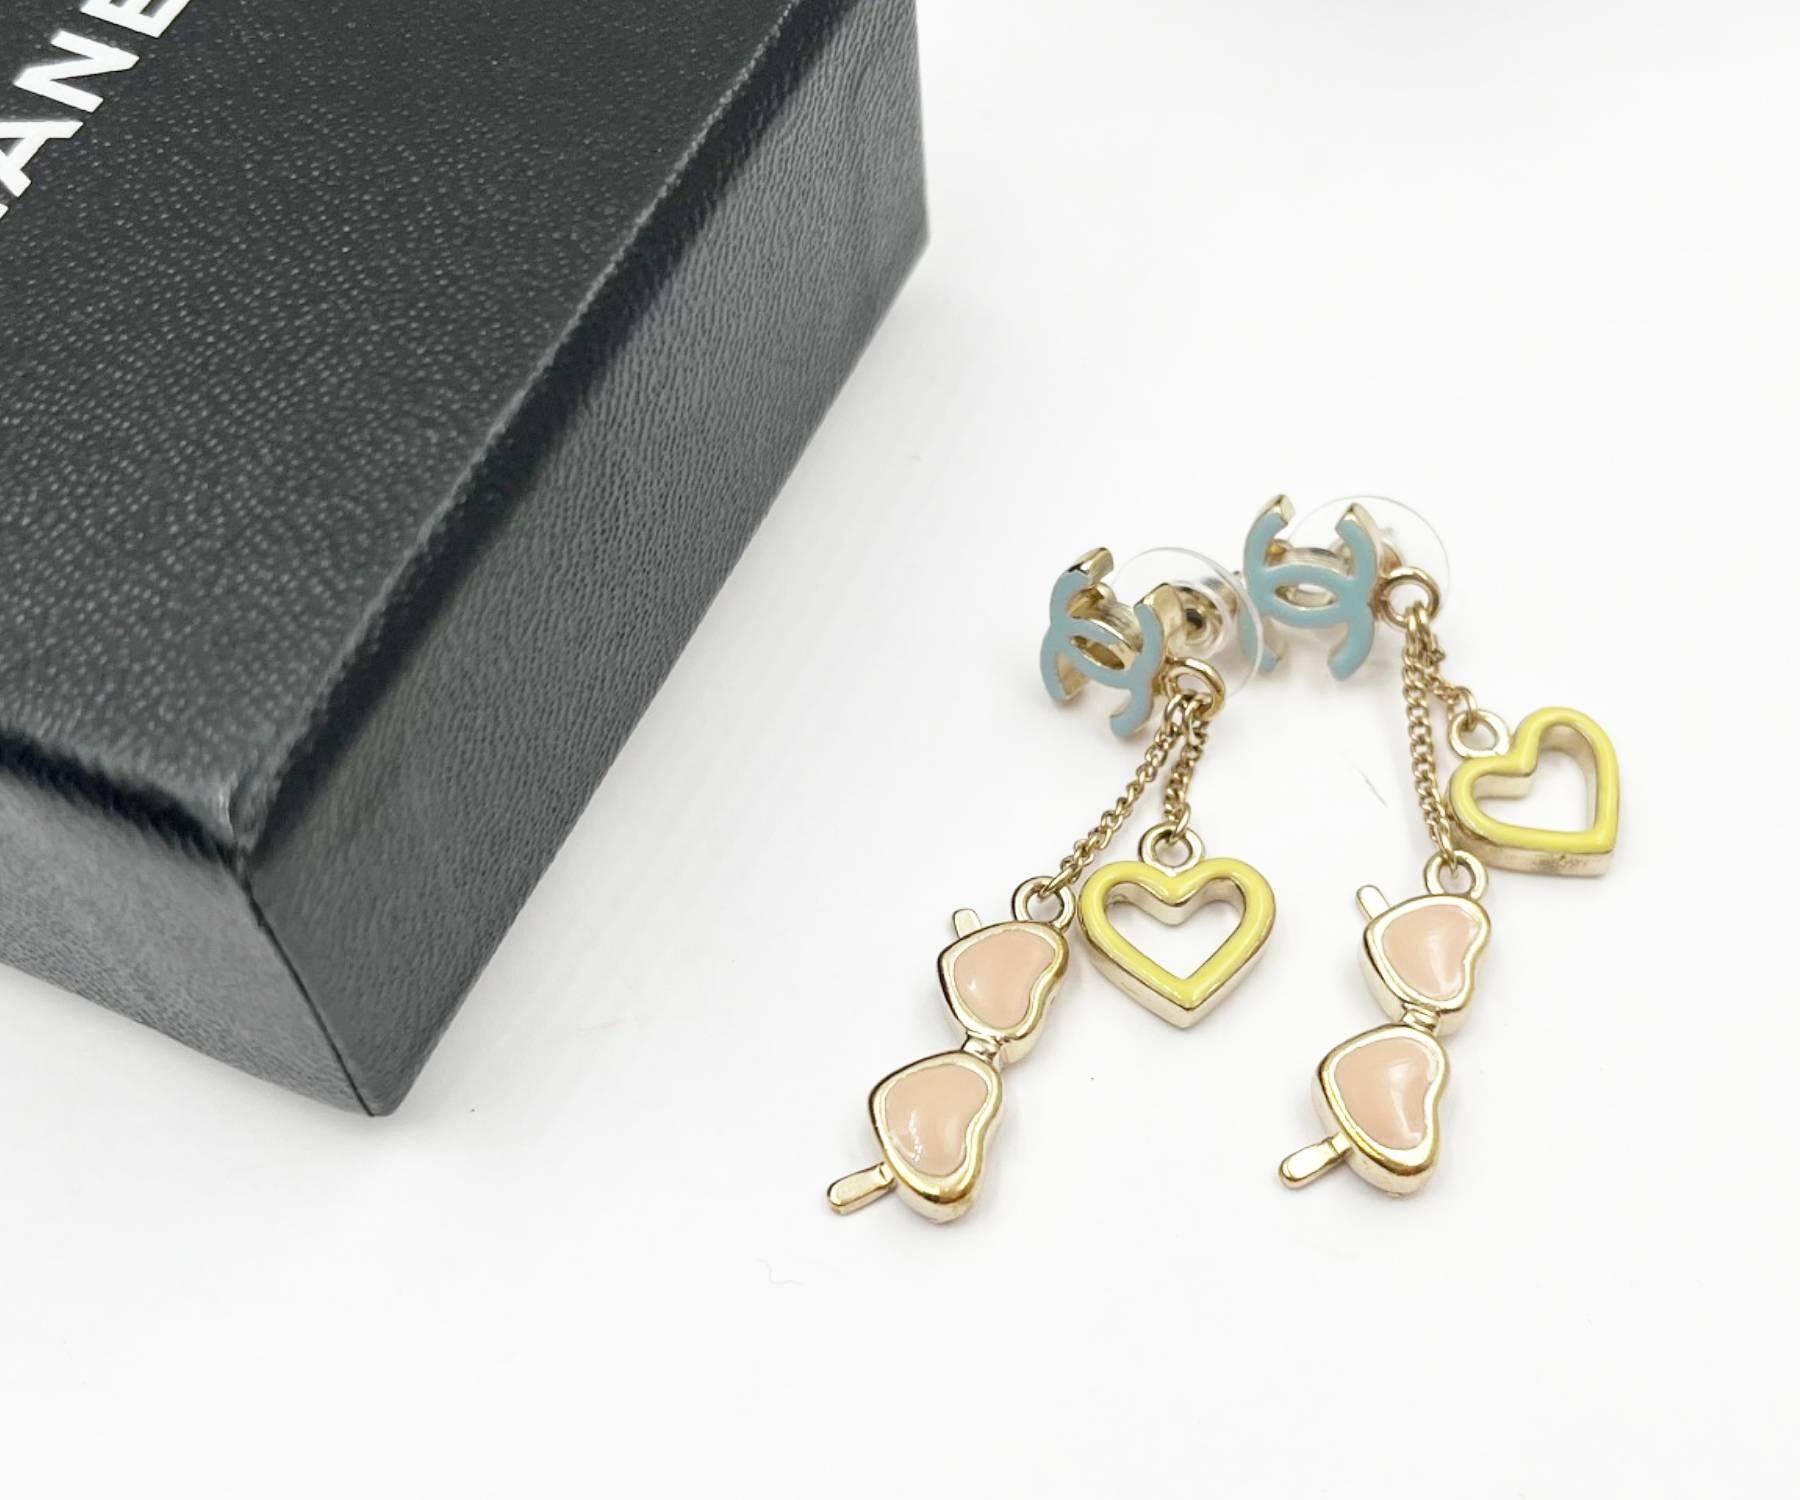 Chanel Gold Pastel Blue CC Yellow Heart Pink Sunglasses Dangling Earrings

* Marked 06
* Made in France
*Comes with original box

-Approximately 1.9″ x 0.5″
-Very cute design
-There is a little piece of blue enamel is missing on the CC. Other than